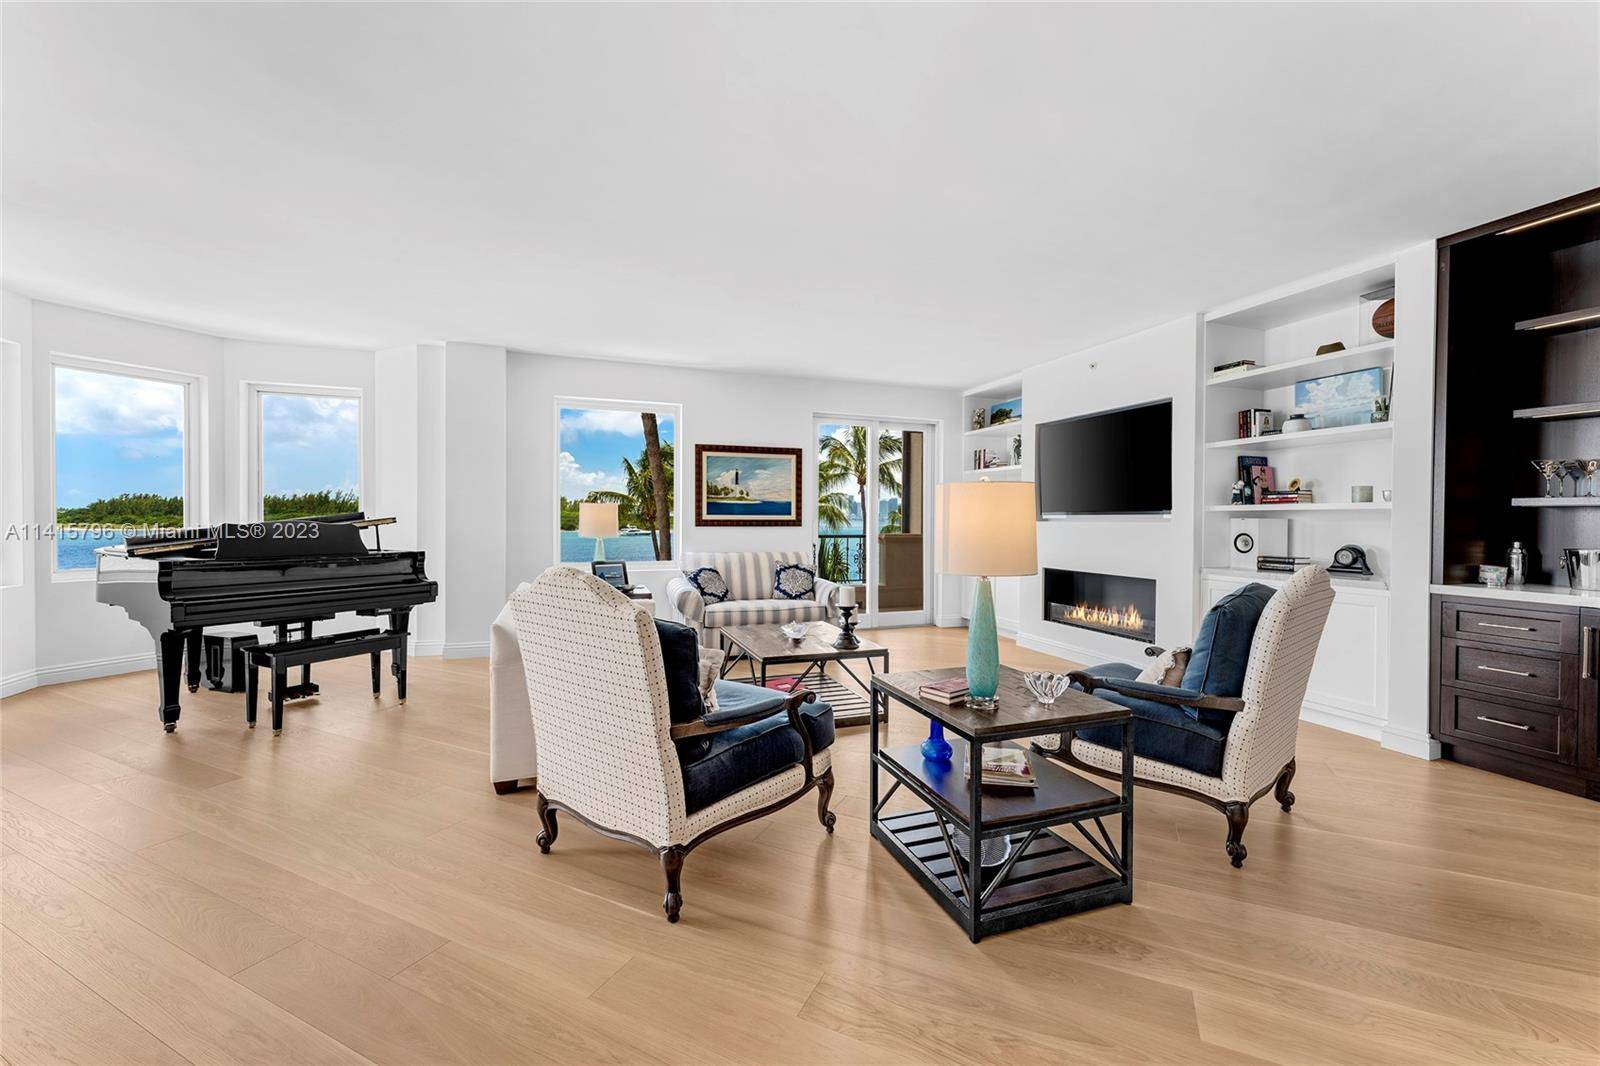 Amazing renovation in Bayside 3BR 3 1BA w 3, 192 SF of beautifully proportioned interior space, offering a large, gated entrance terrace, plus 3 bayside terraces w amazing views to ...